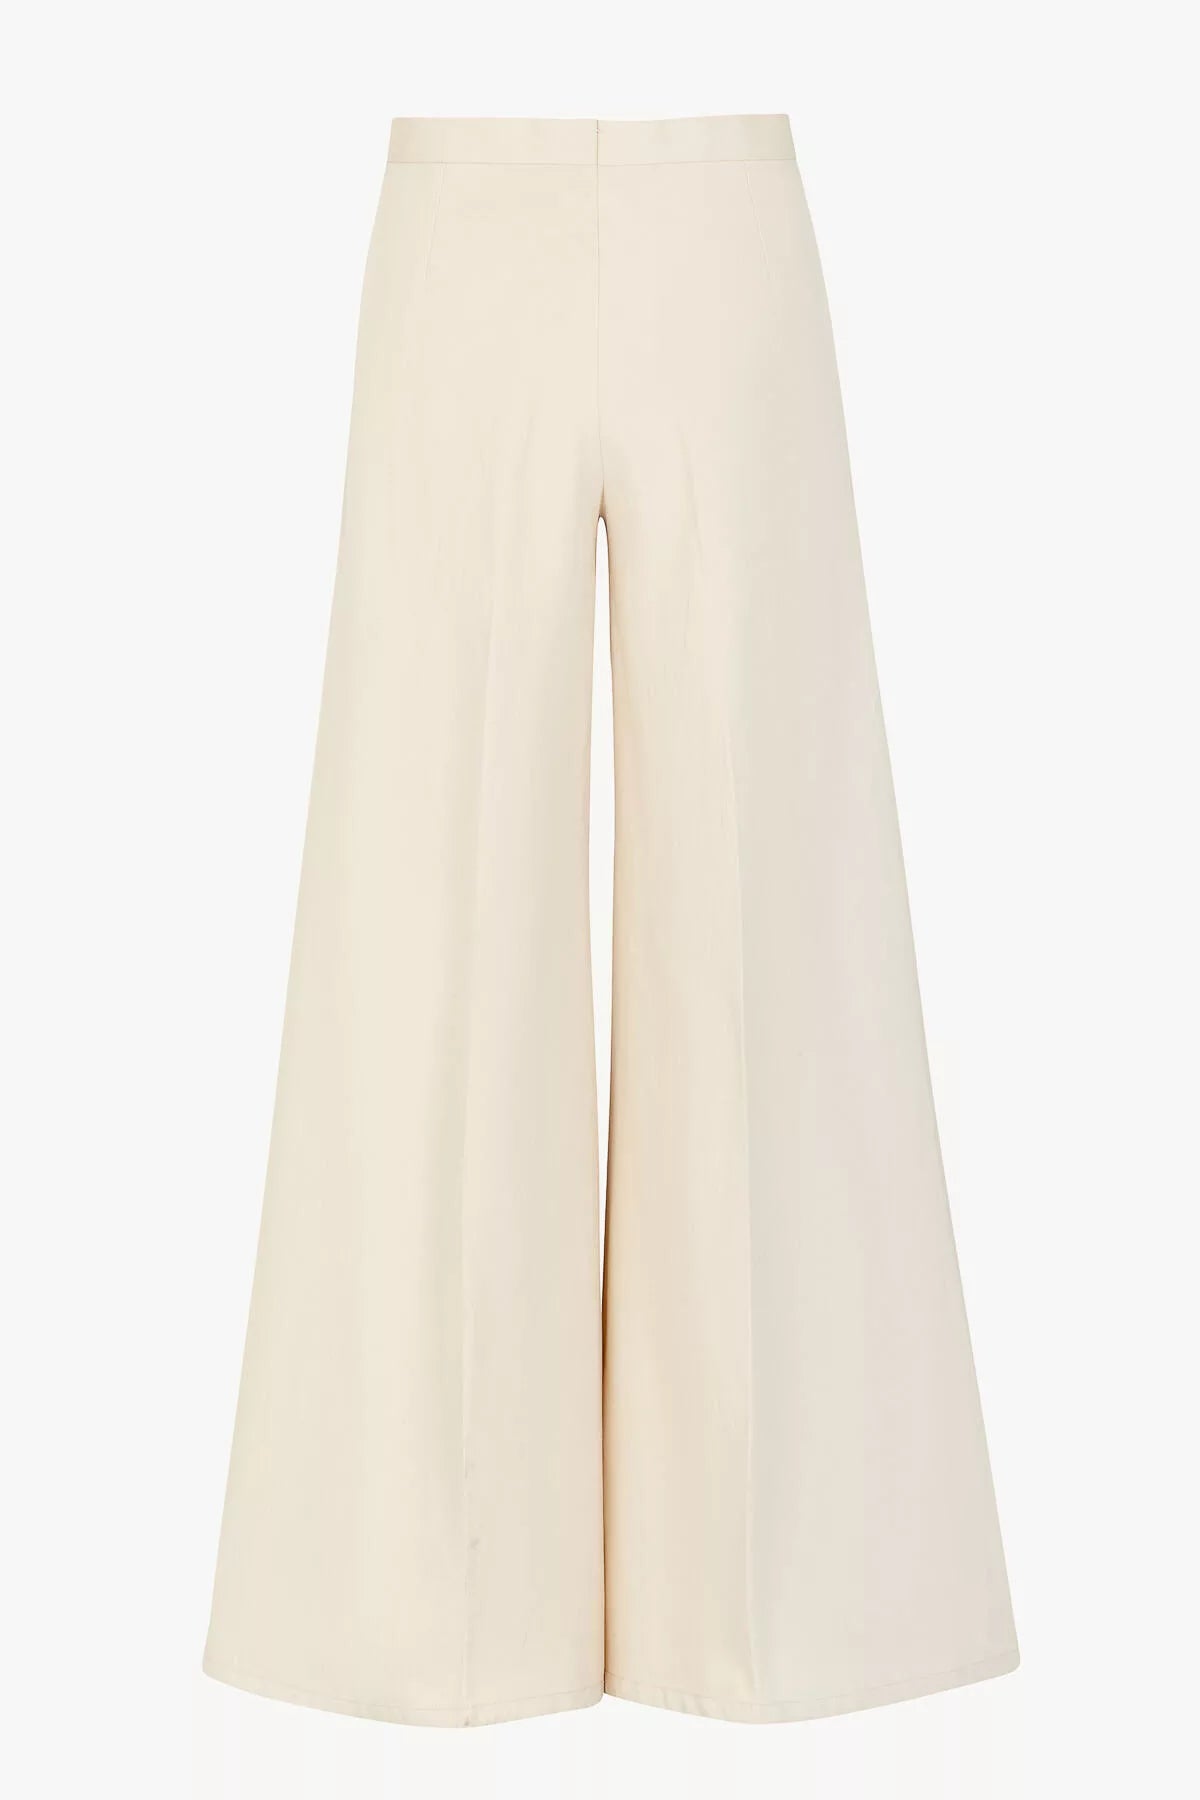 Giuliva-Heritage-The-Paola-Trousers-_Cotton-and-Silk-Ivory-Amarees